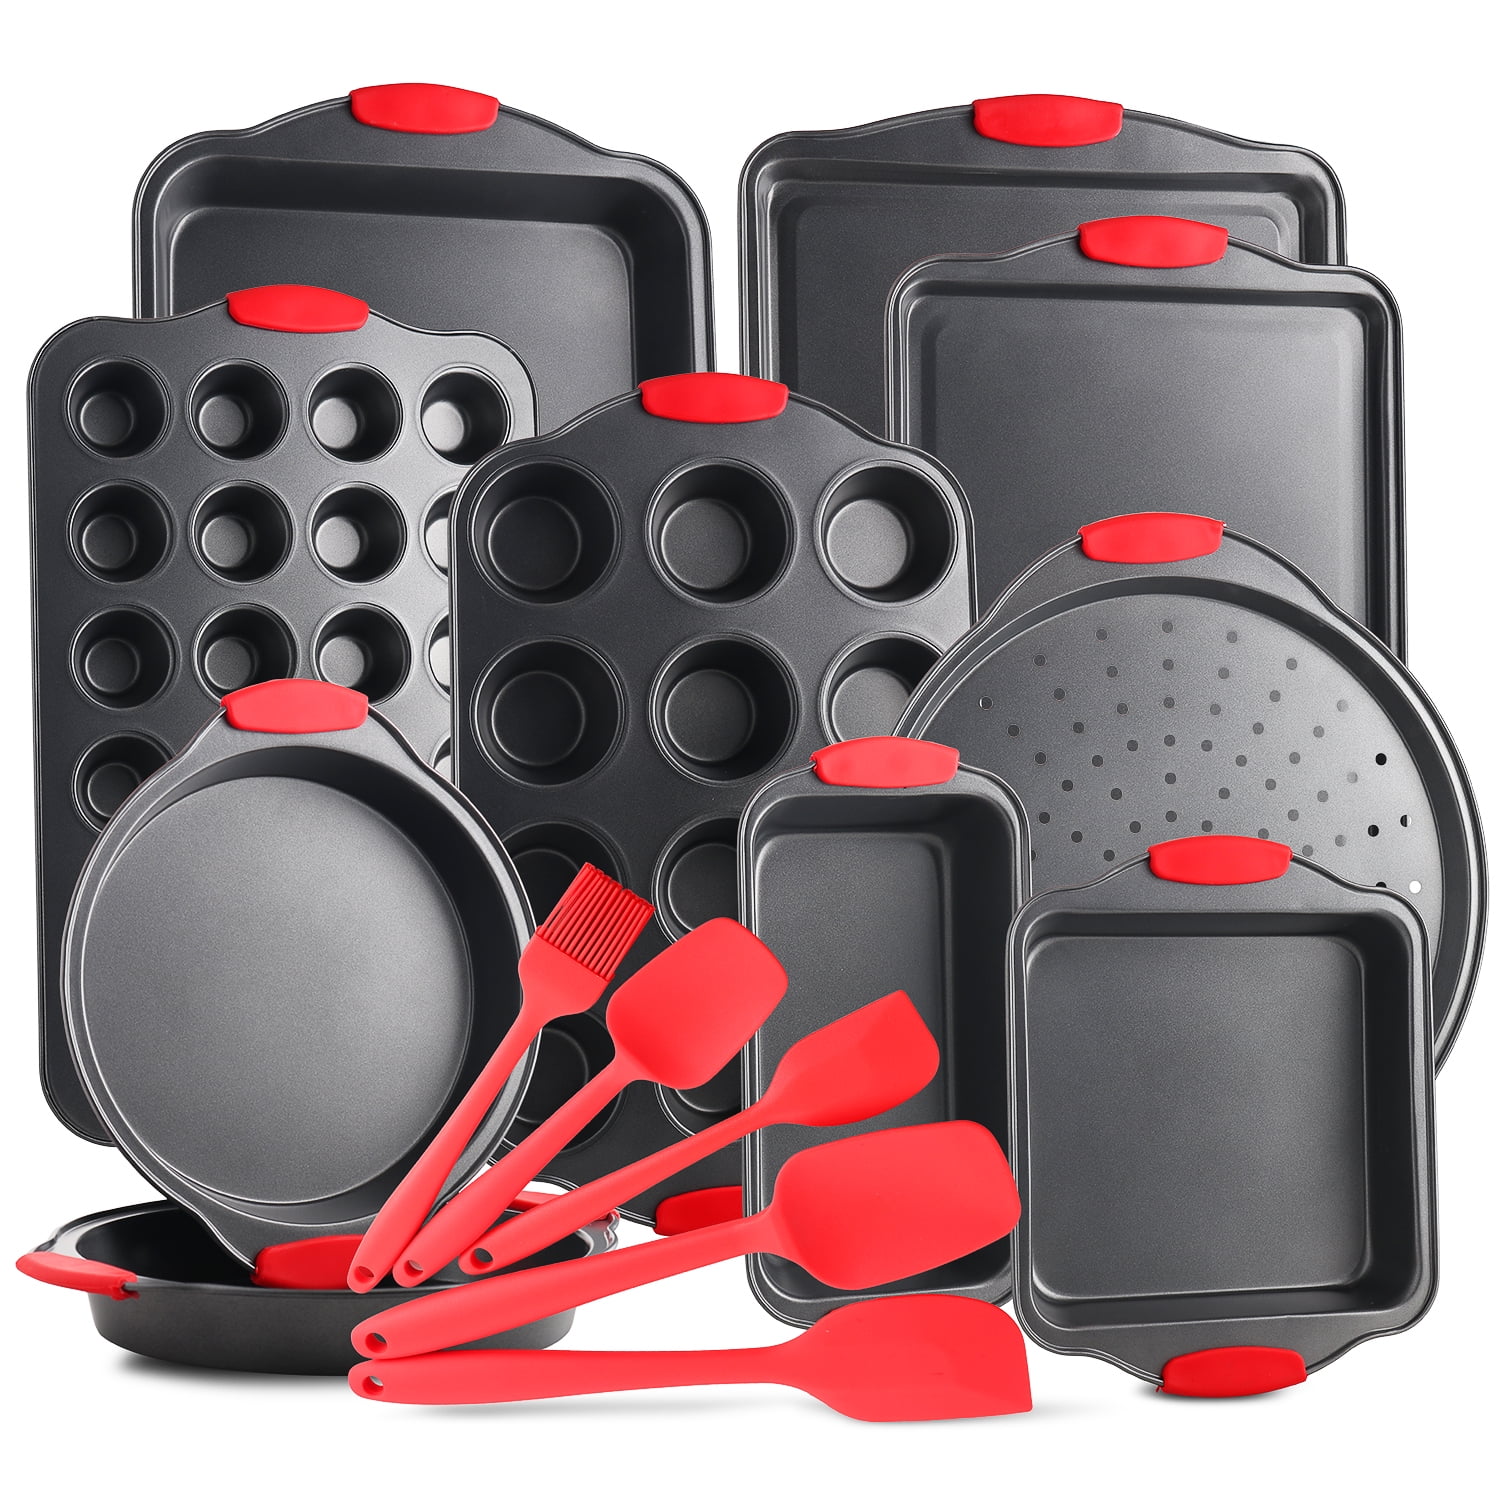 Eatex 39-Piece Nonstick Black Steel Bakeware Set with Red Utensil and Silicone Handles